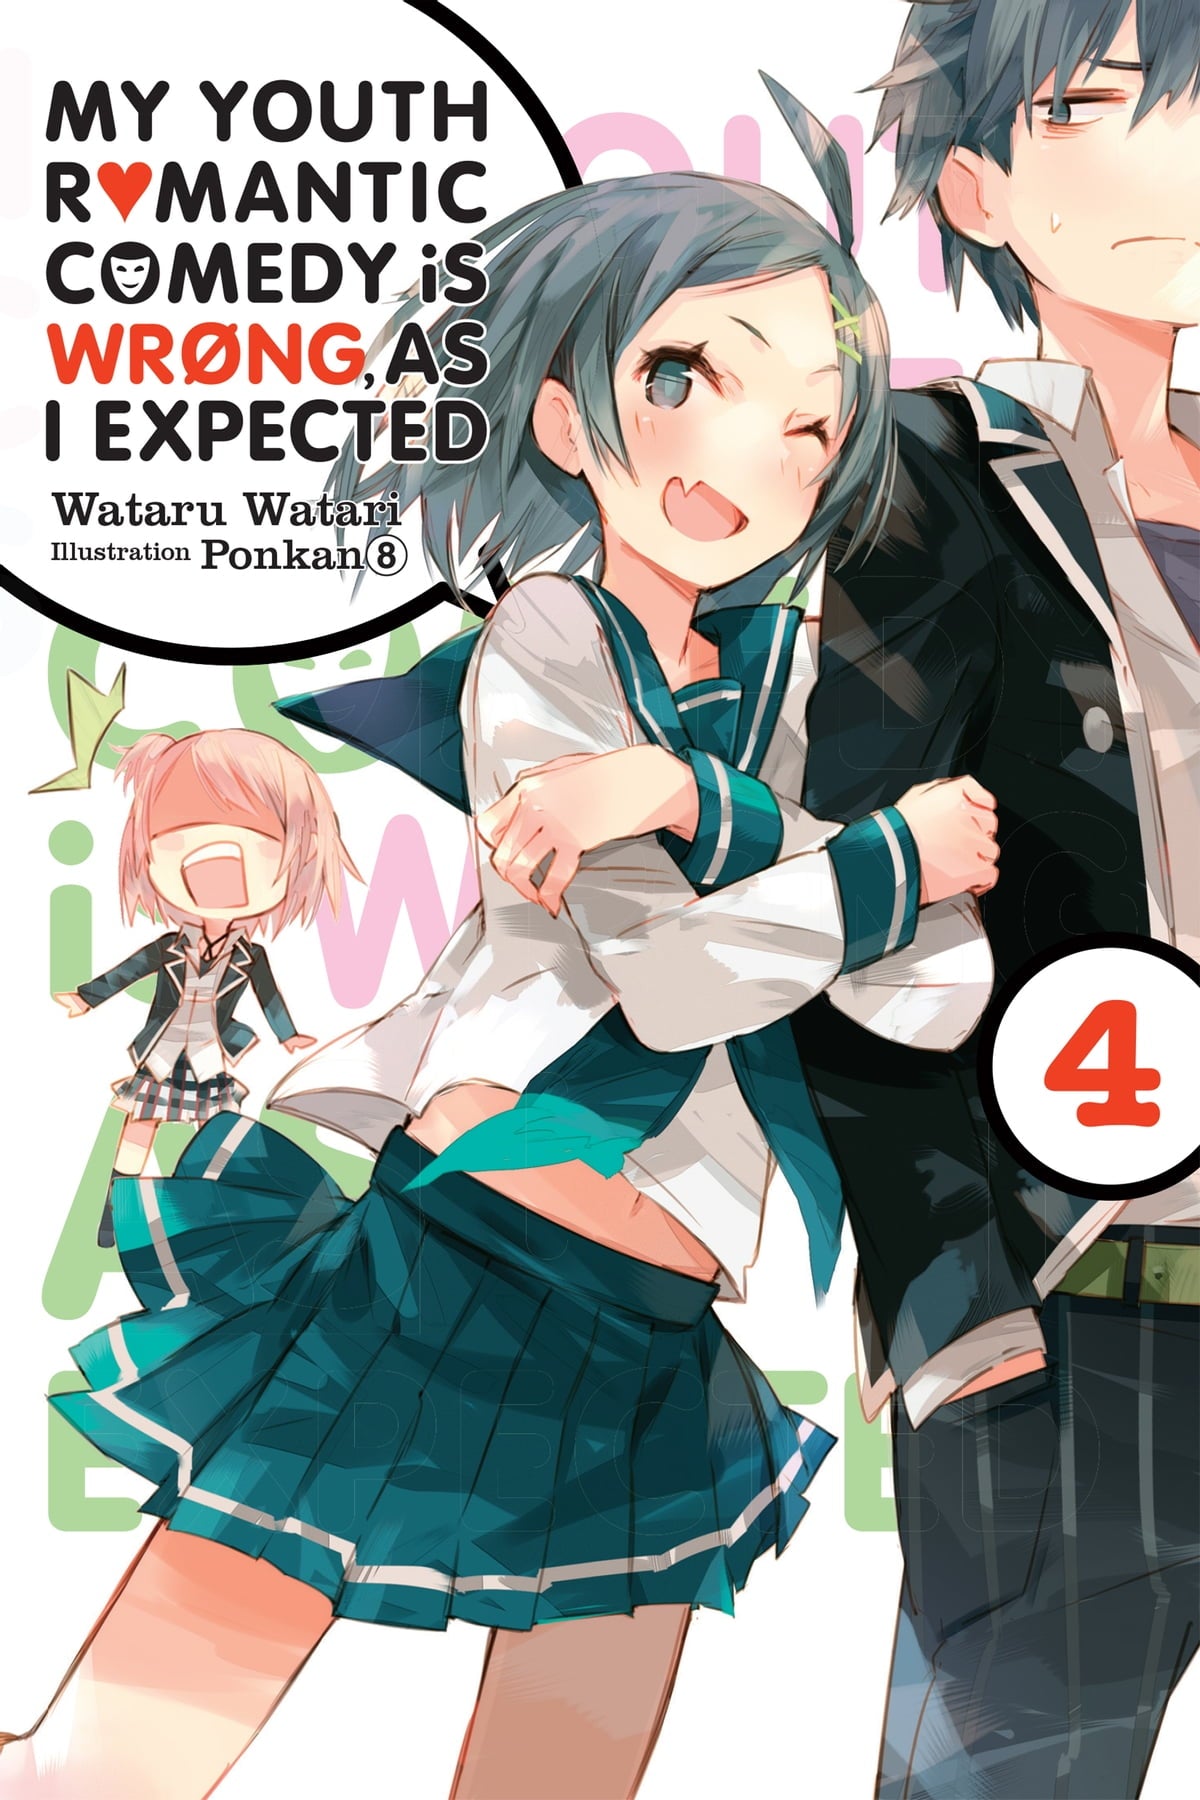 My Youth Romantic Comedy Is Wrong, as I Expected Vol. 04 (Light Novel)